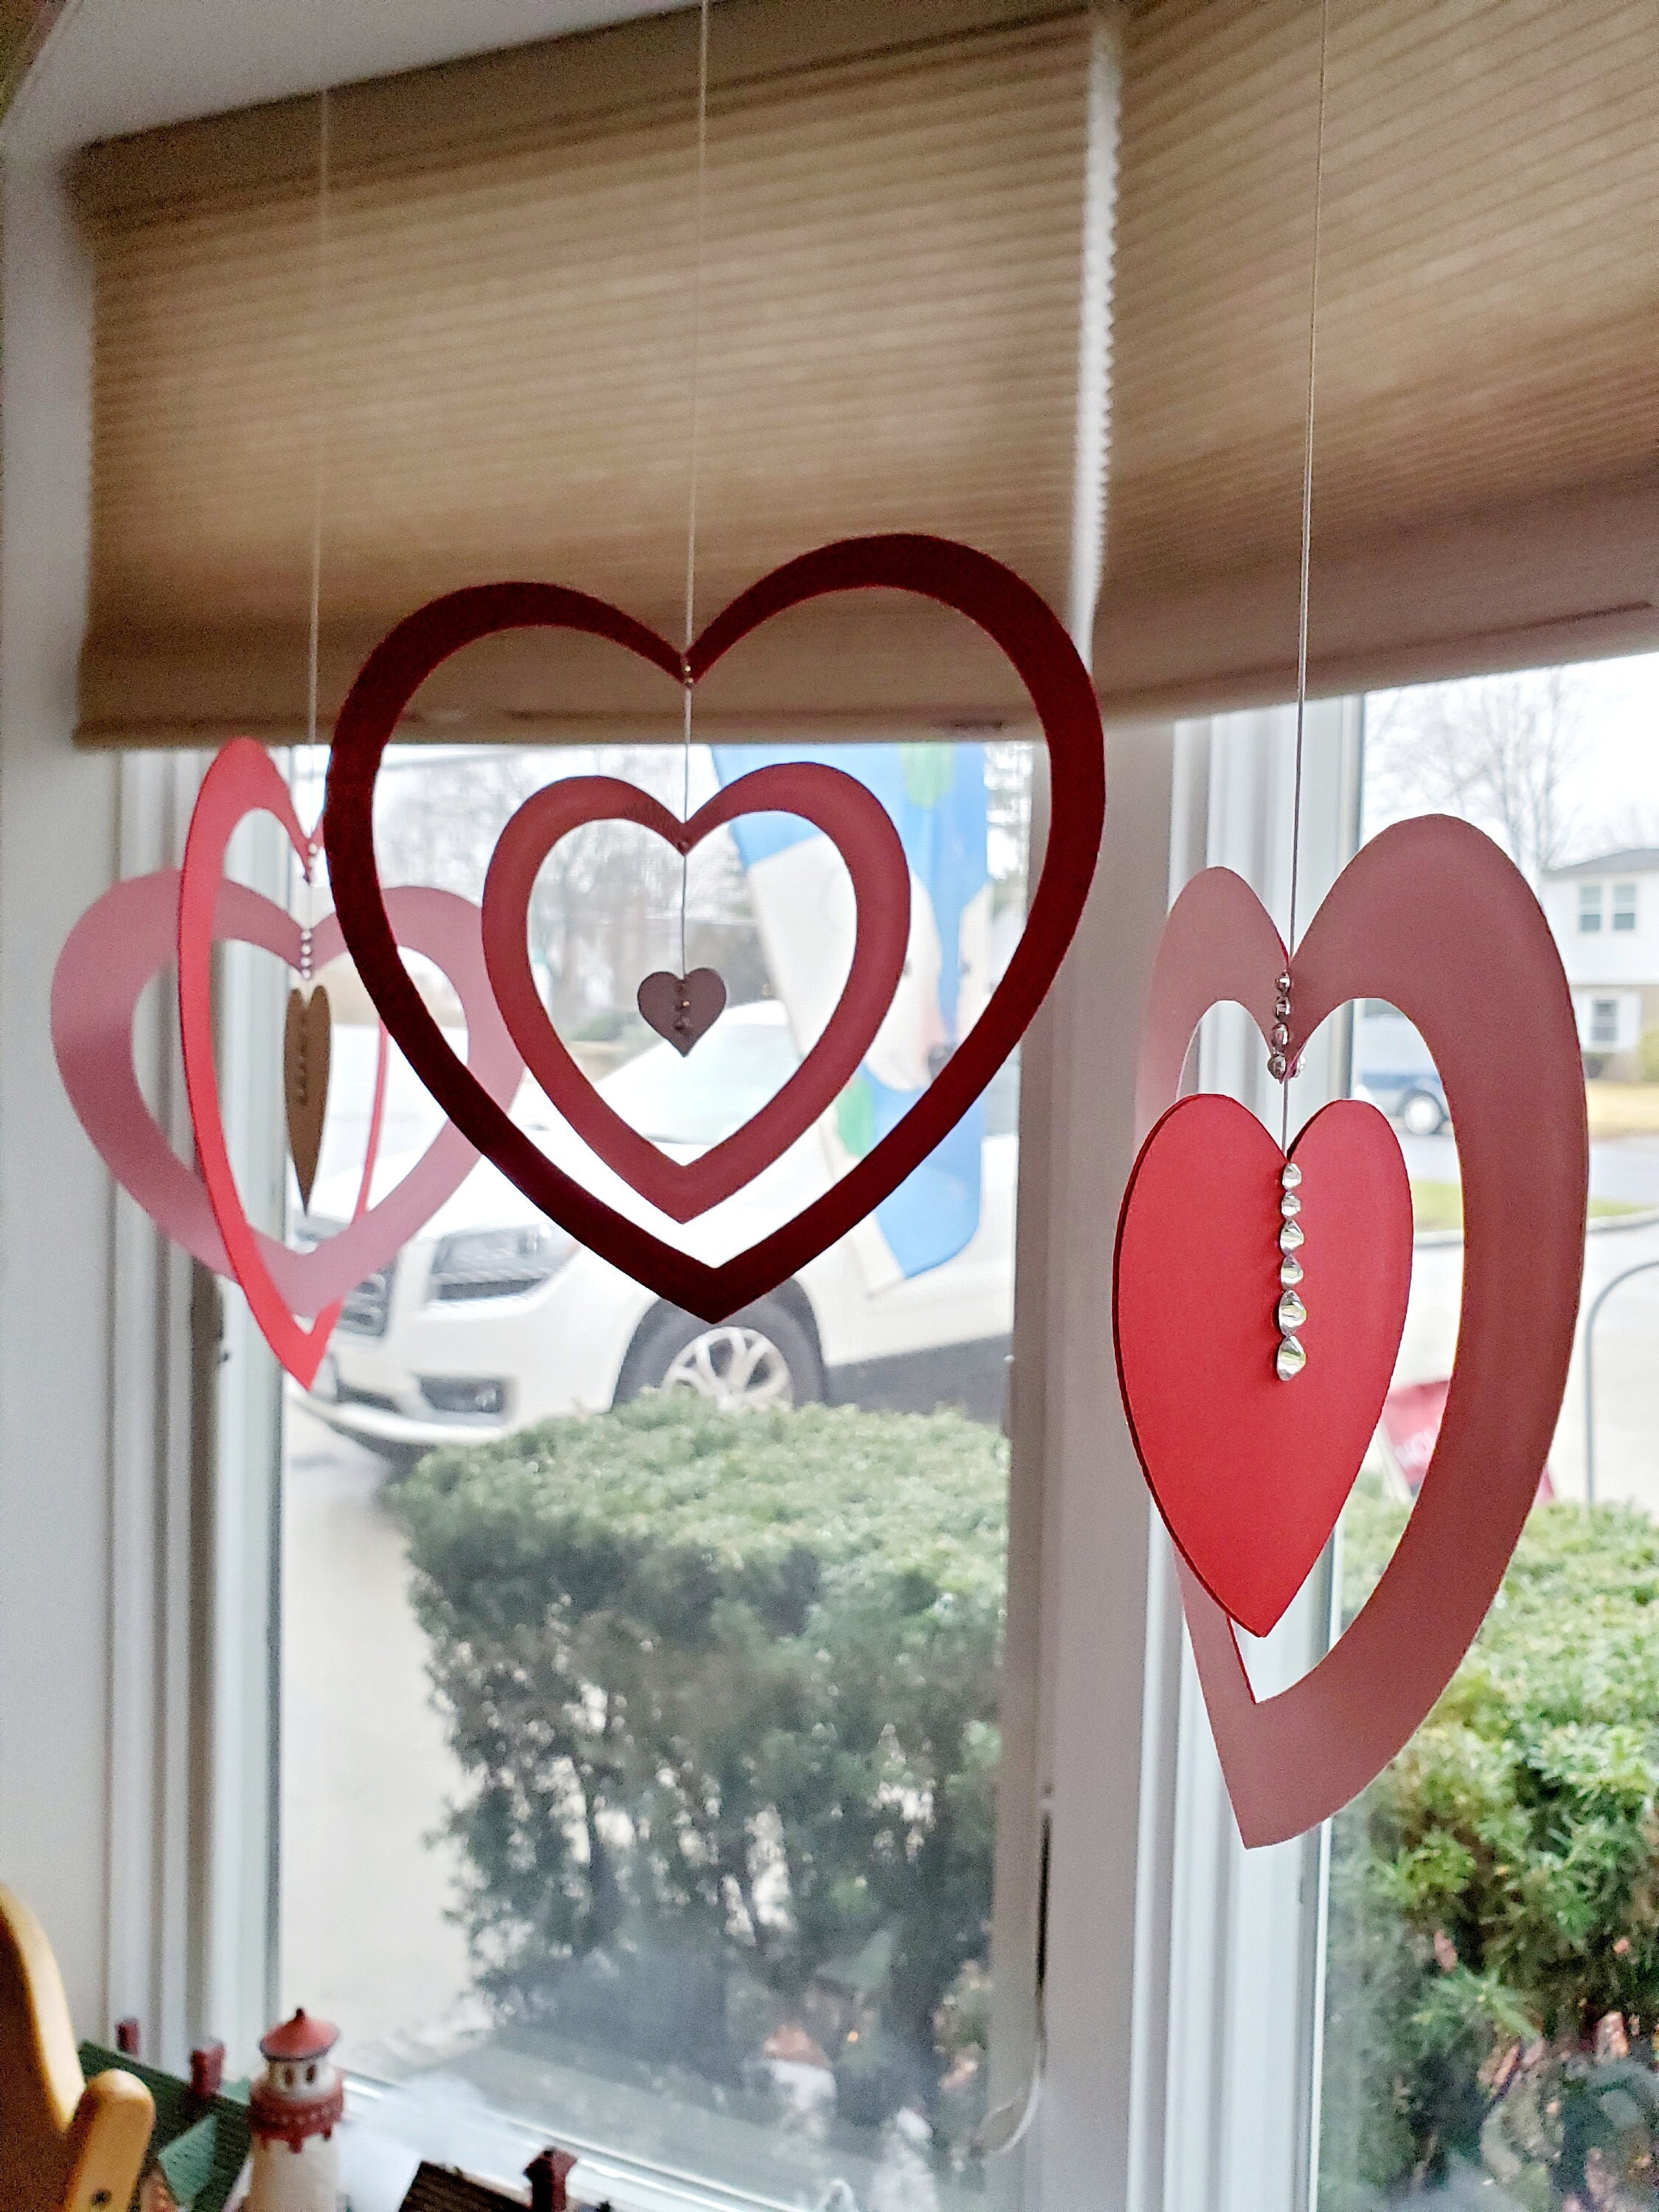 Valentines Day Decorations - Love Tinsel Heart-Shaped, Love Each Moment  Hanging Wall Decorations & Glittery Foam Table Scatter Hearts